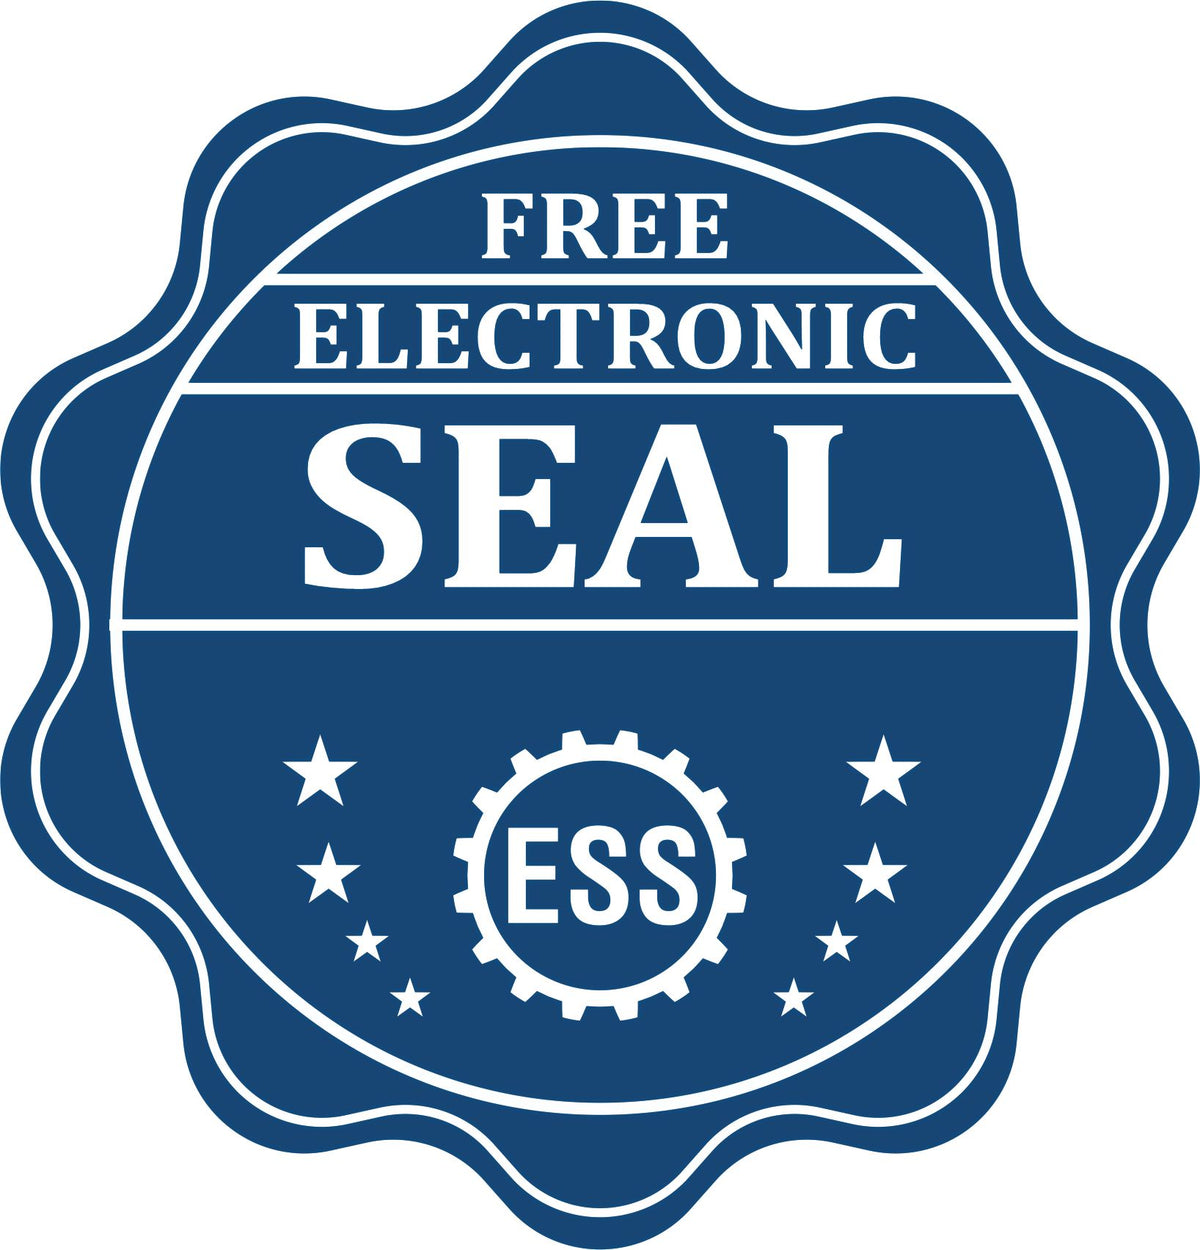 A badge showing a free electronic seal for the Wooden Handle Puerto Rico Rectangular Notary Public Stamp with stars and the ESS gear on the emblem.